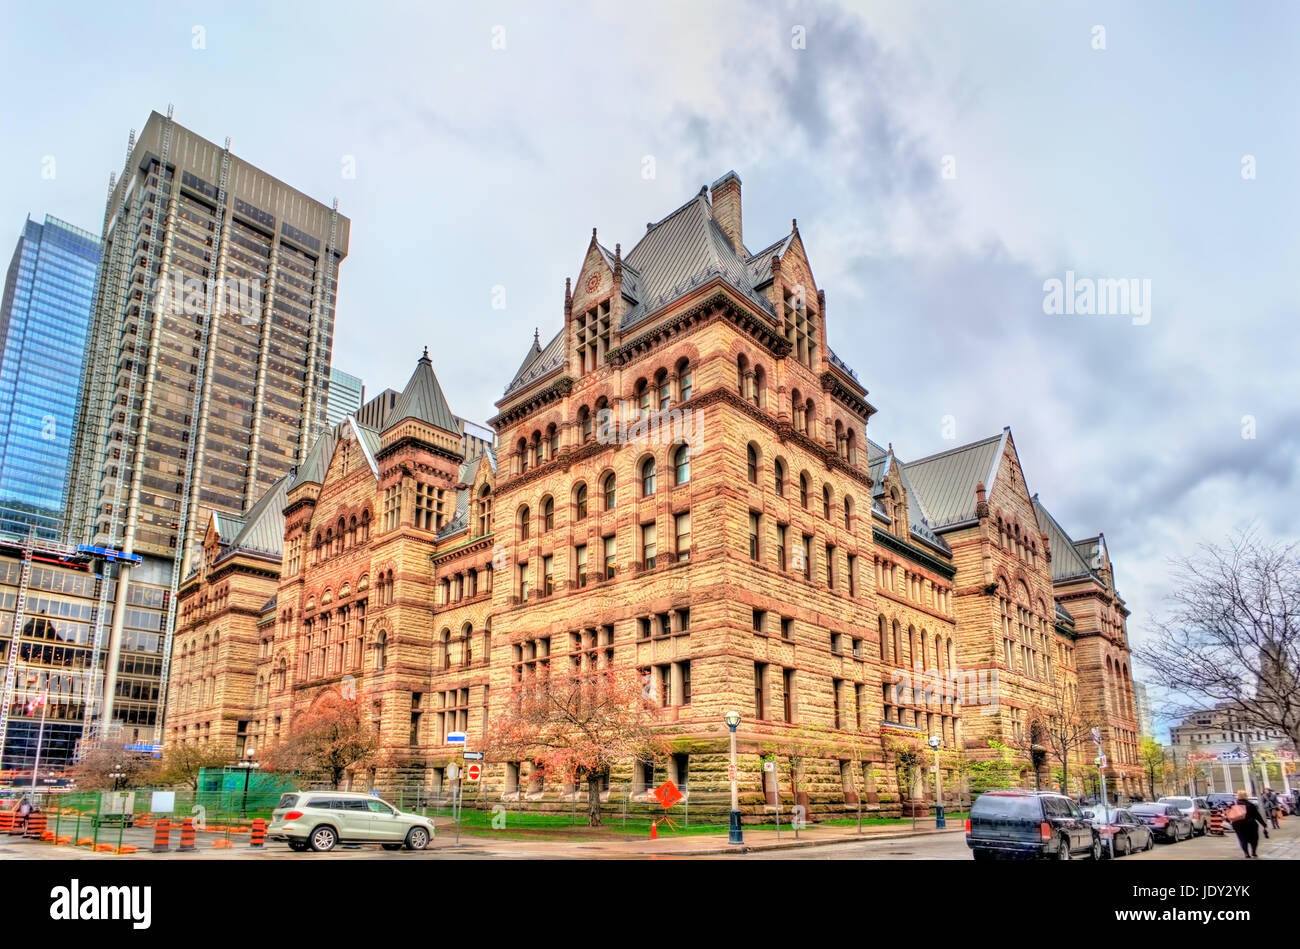 The Old City Hall, a Romanesque civic building and court house in Toronto, Canada Stock Photo